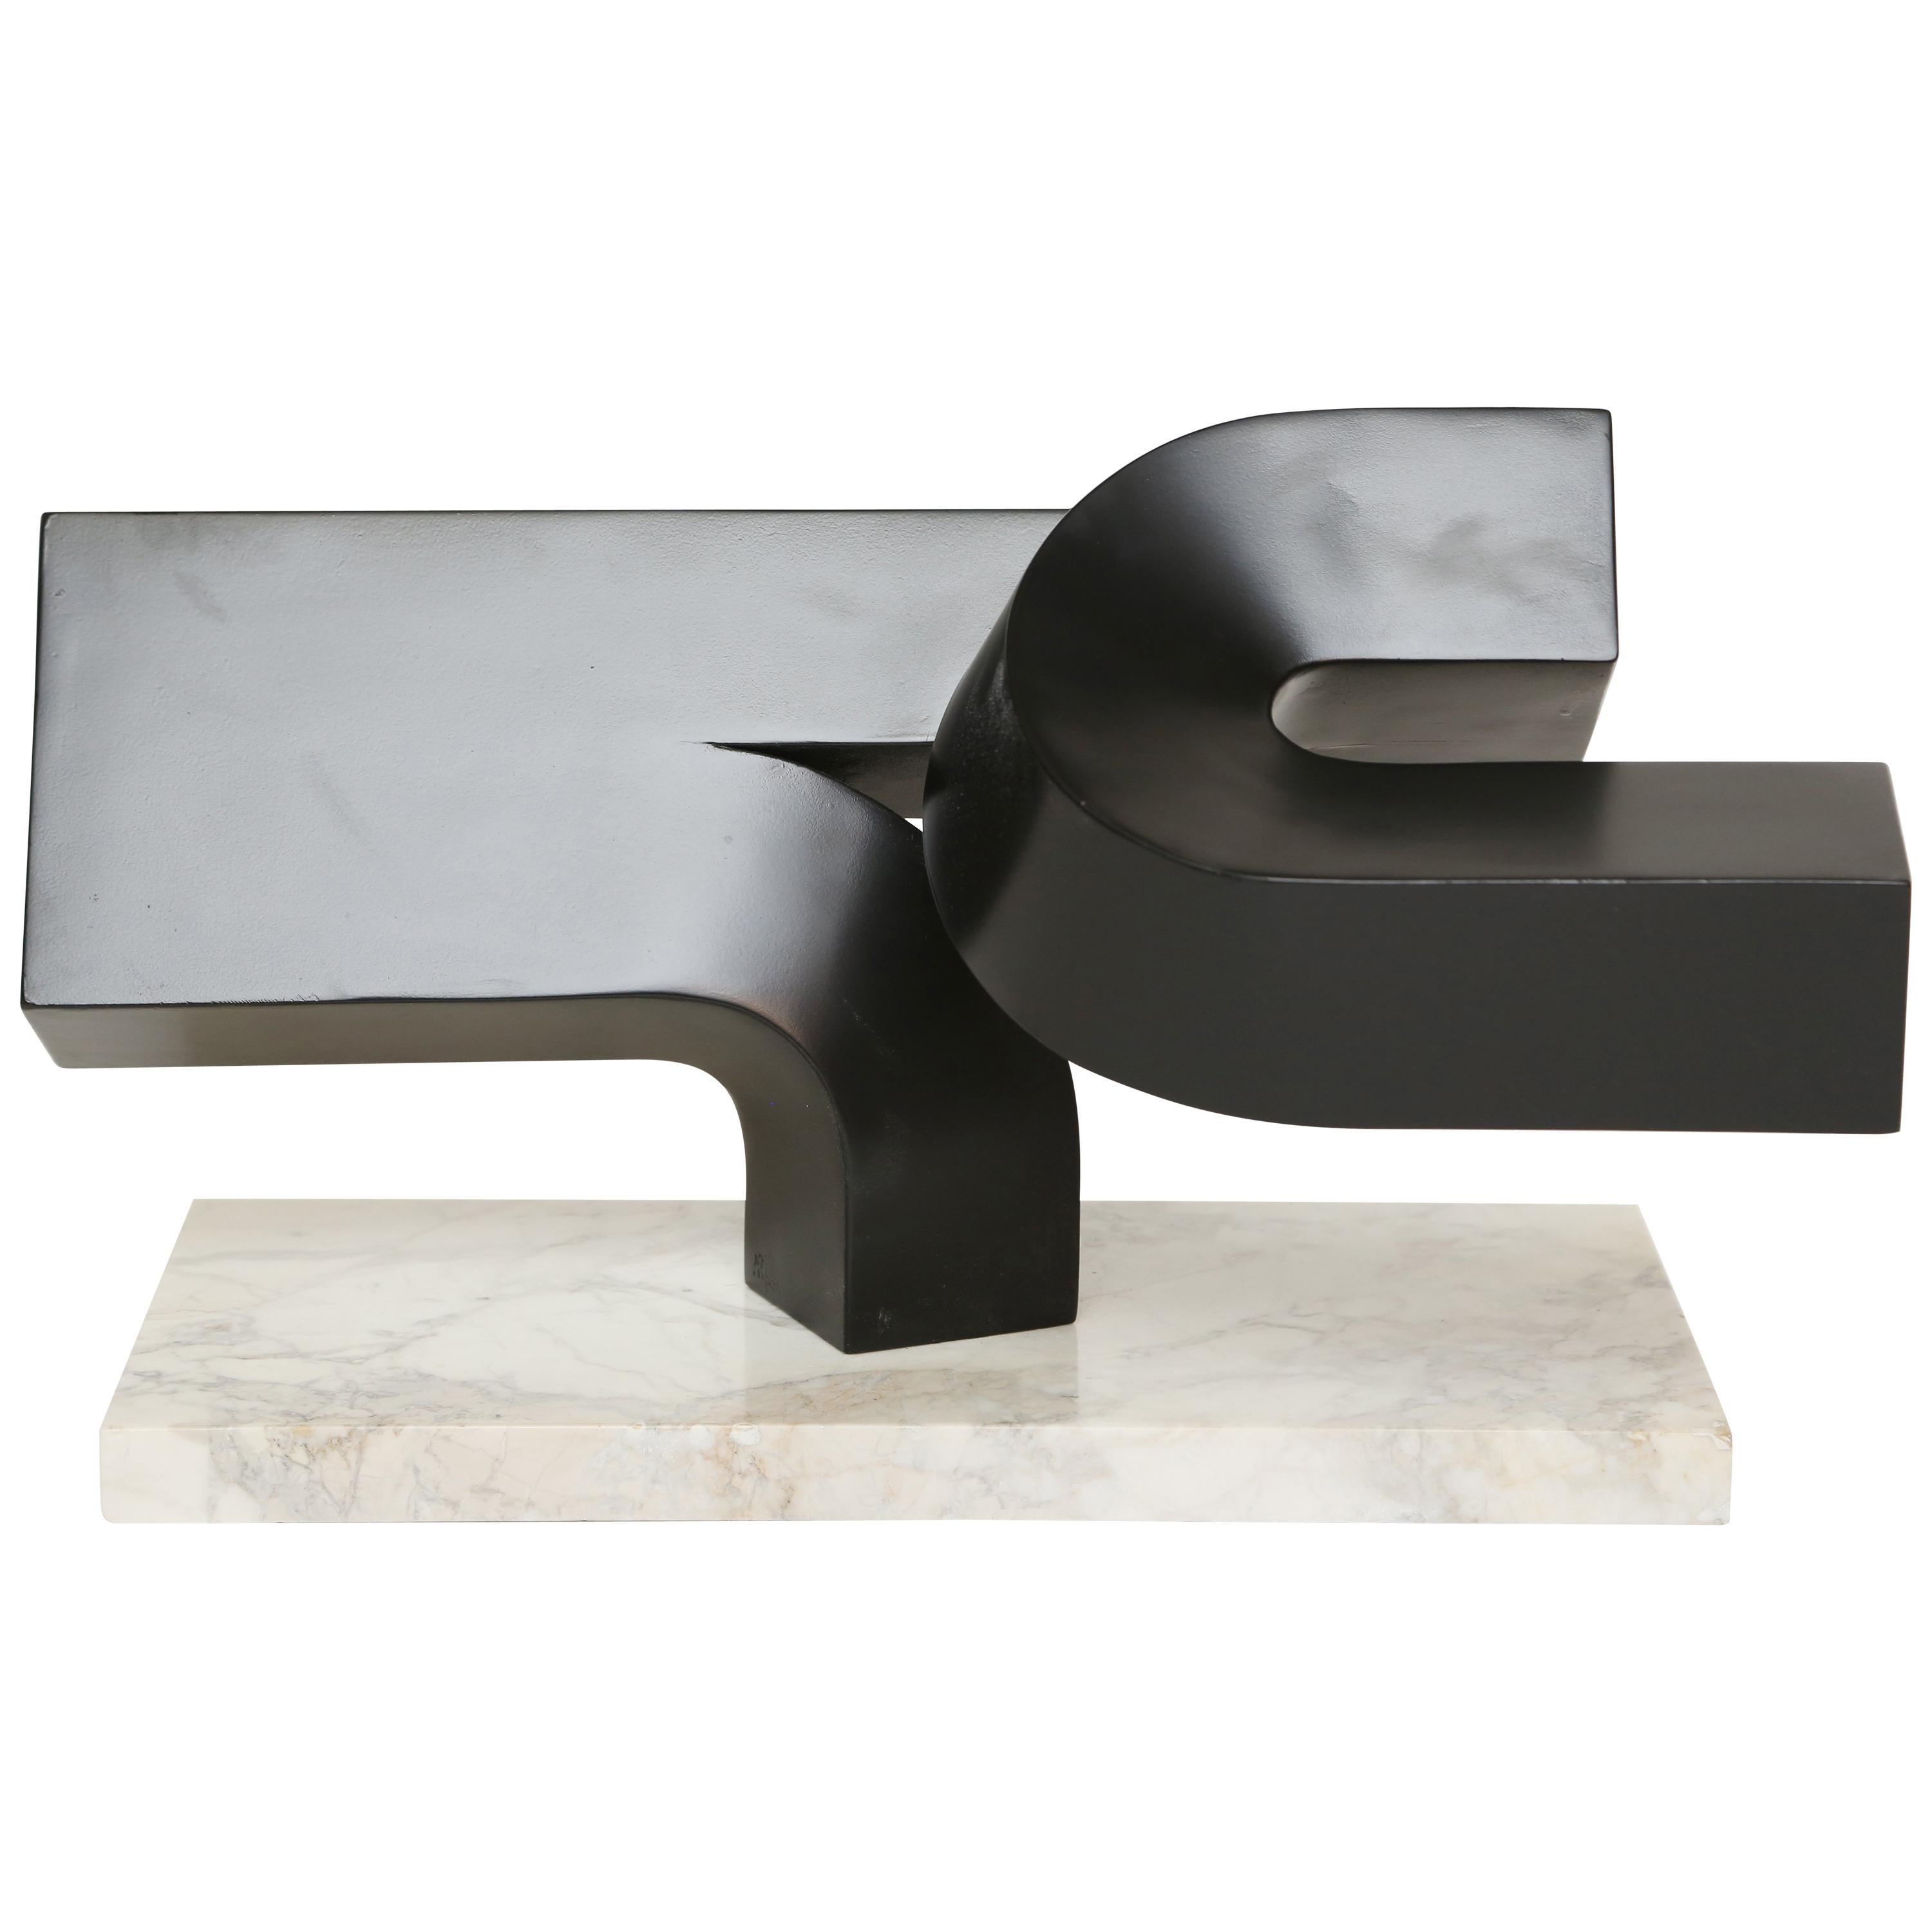 Clement Meadmore Attributed Working Model